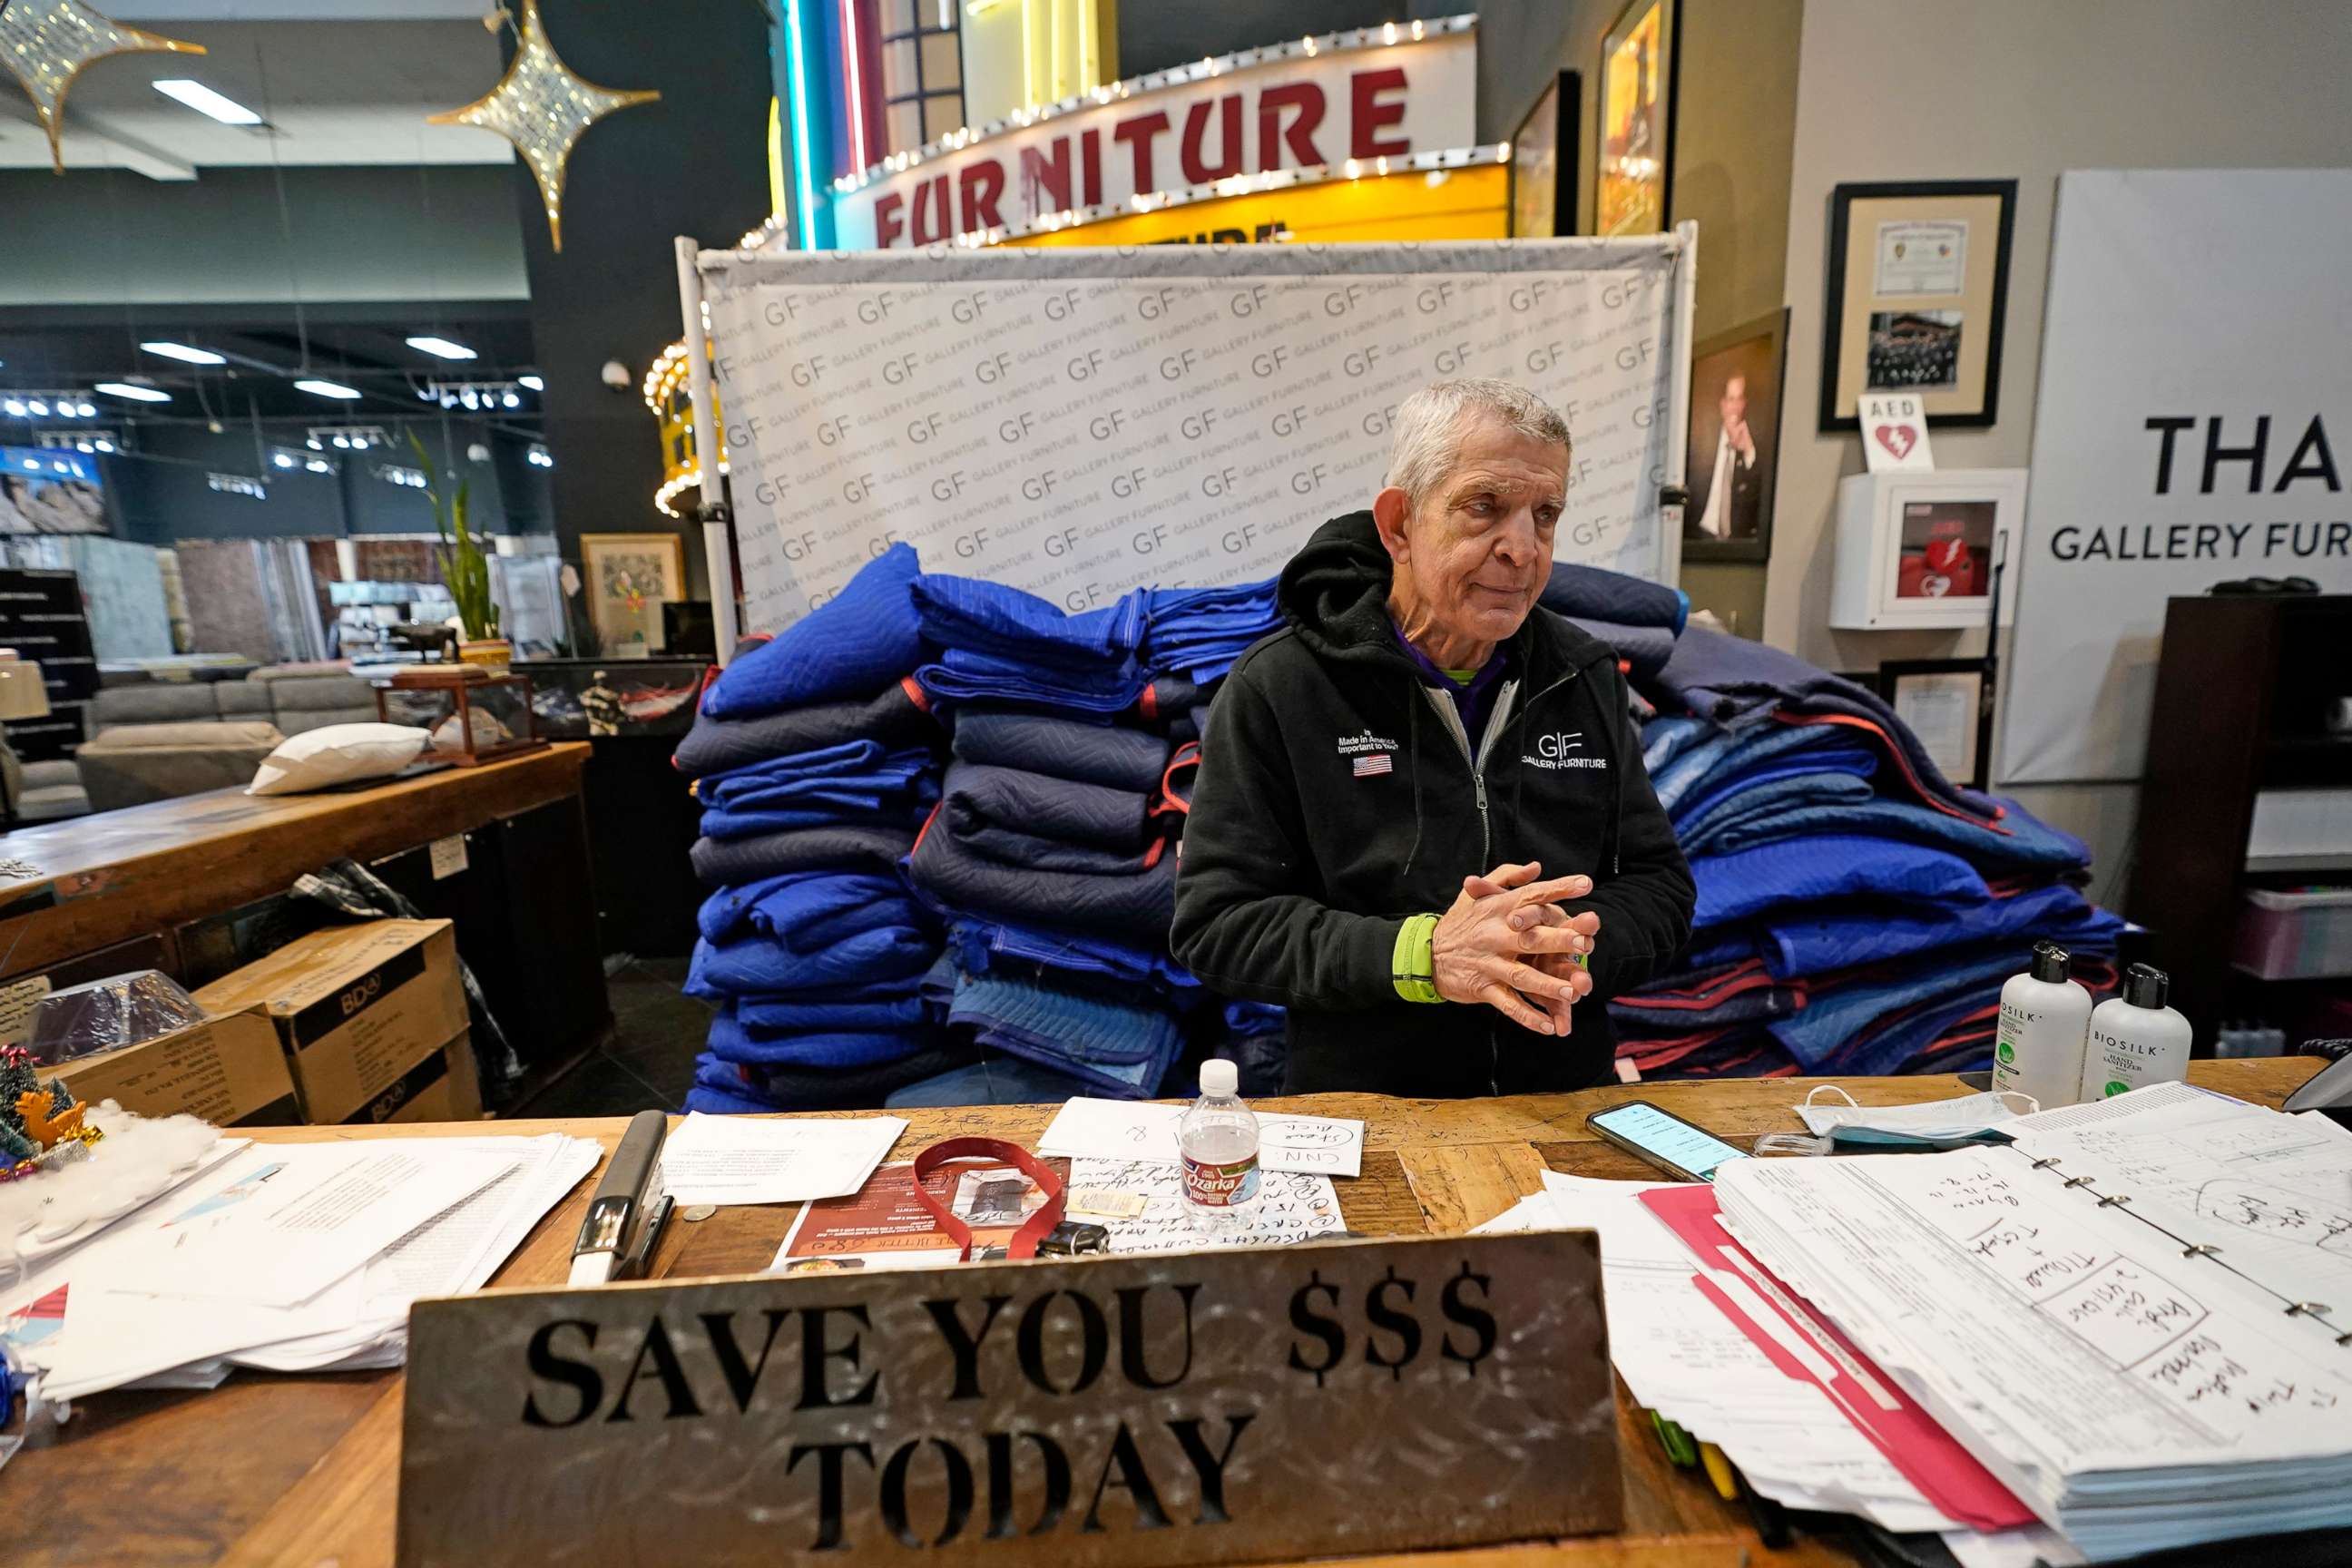 PHOTO: Owner Jim McIngvale talks about opening his Gallery Furniture store as a shelter, Feb. 17, 2021, in Houston. Millions in Texas still had no power after a historic snowfall and single-digit temperatures causing widespread blackouts.